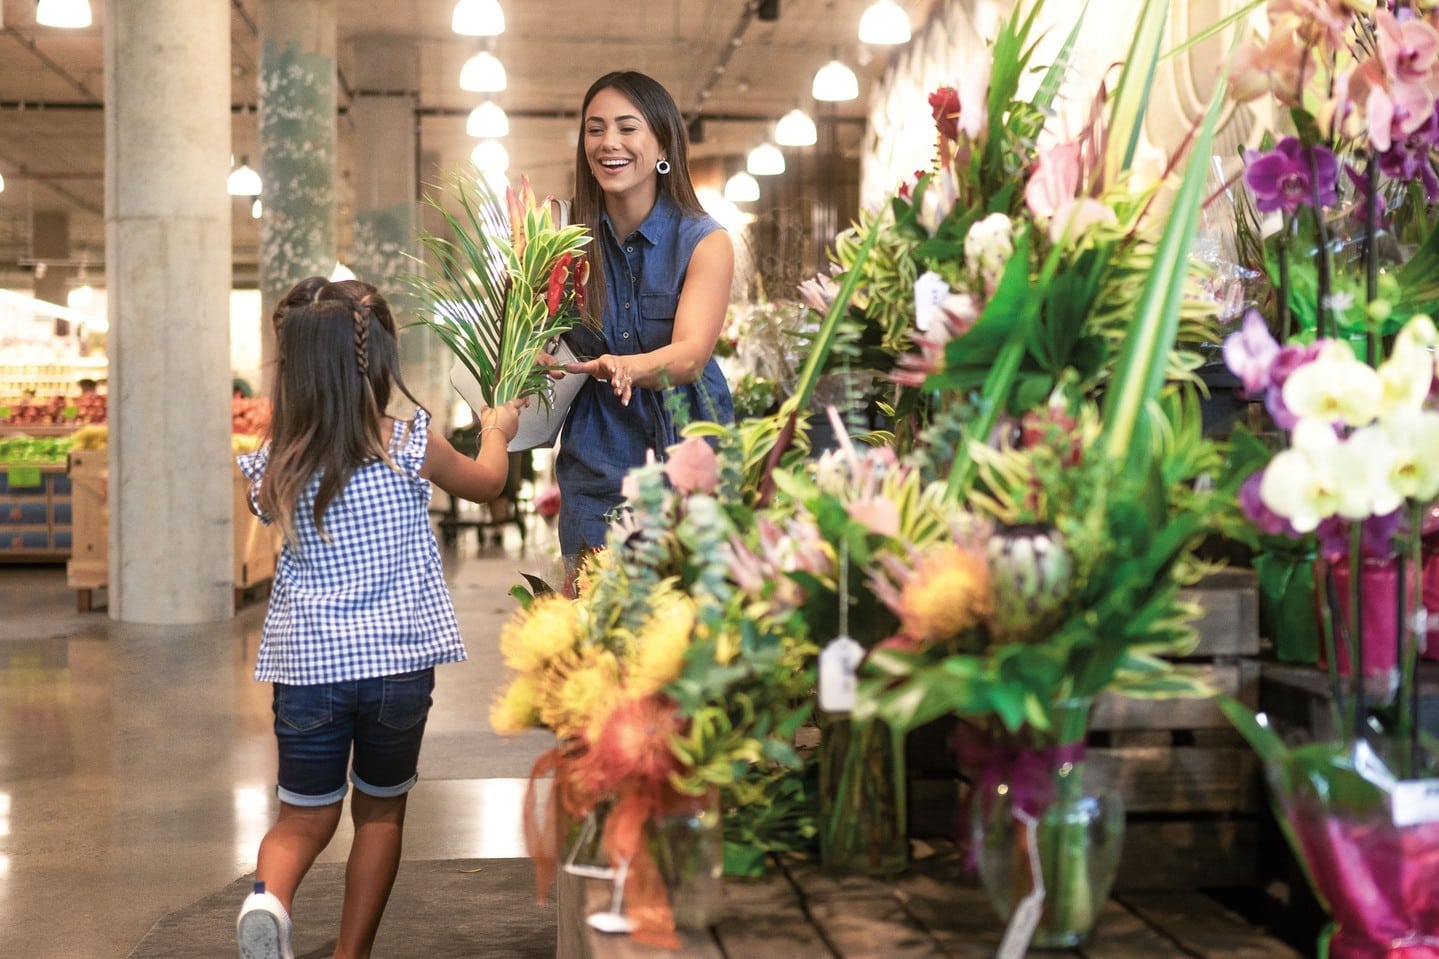 With Valentine’s Day right around the corner, choose a bouquet of blooms or fragrant lei from one of the many neighborhood florists in Ward Village. Visit the link in our bio to explore a variety of shops to find the perfect gift.